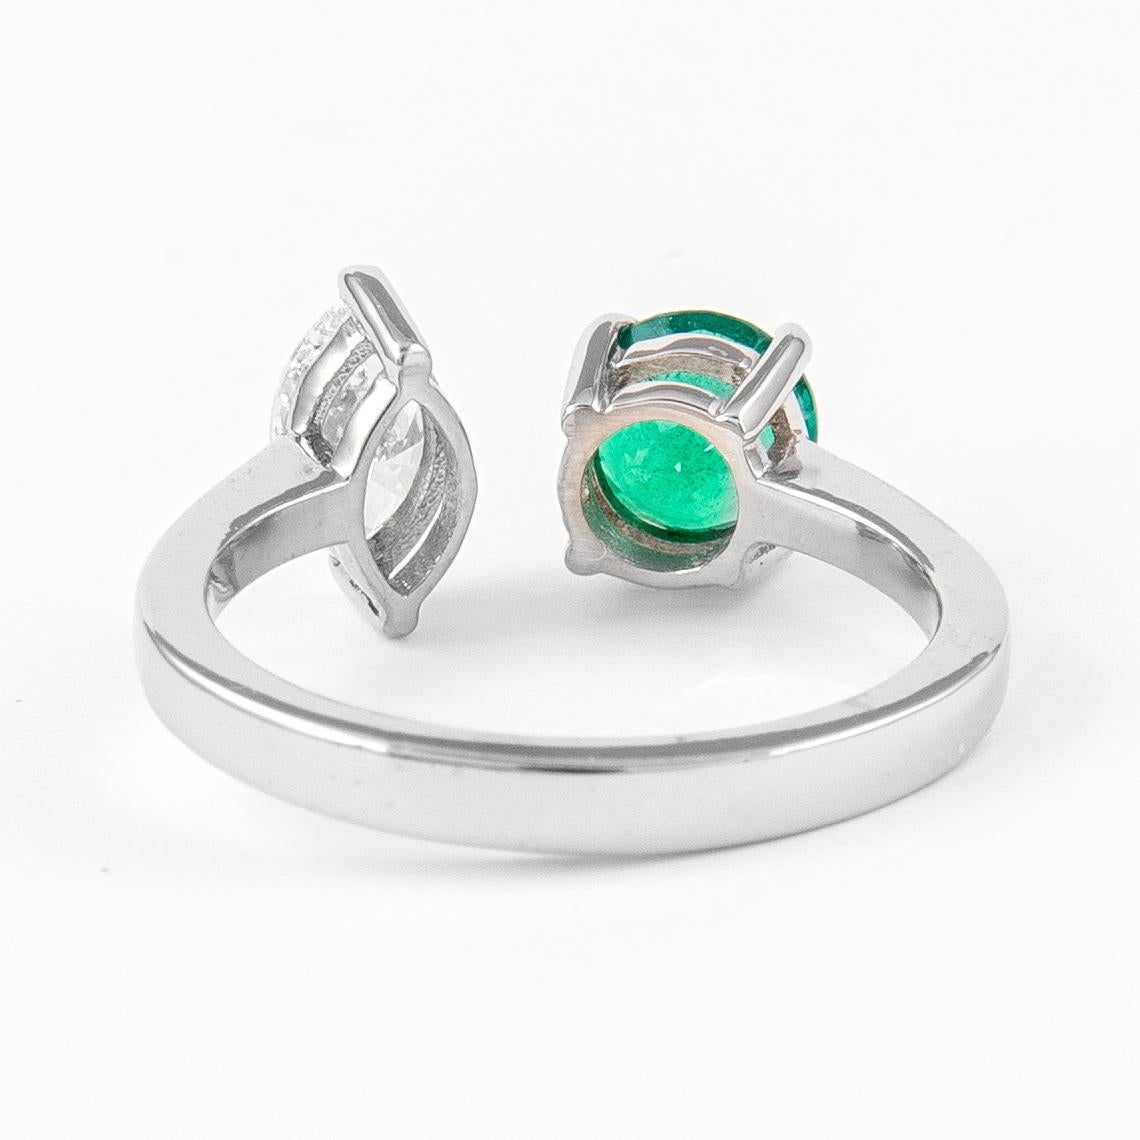 Alexander 1.34 Carat Toi Et Moi Emerald & Diamonds Ring 18k White Gold In New Condition For Sale In BEVERLY HILLS, CA